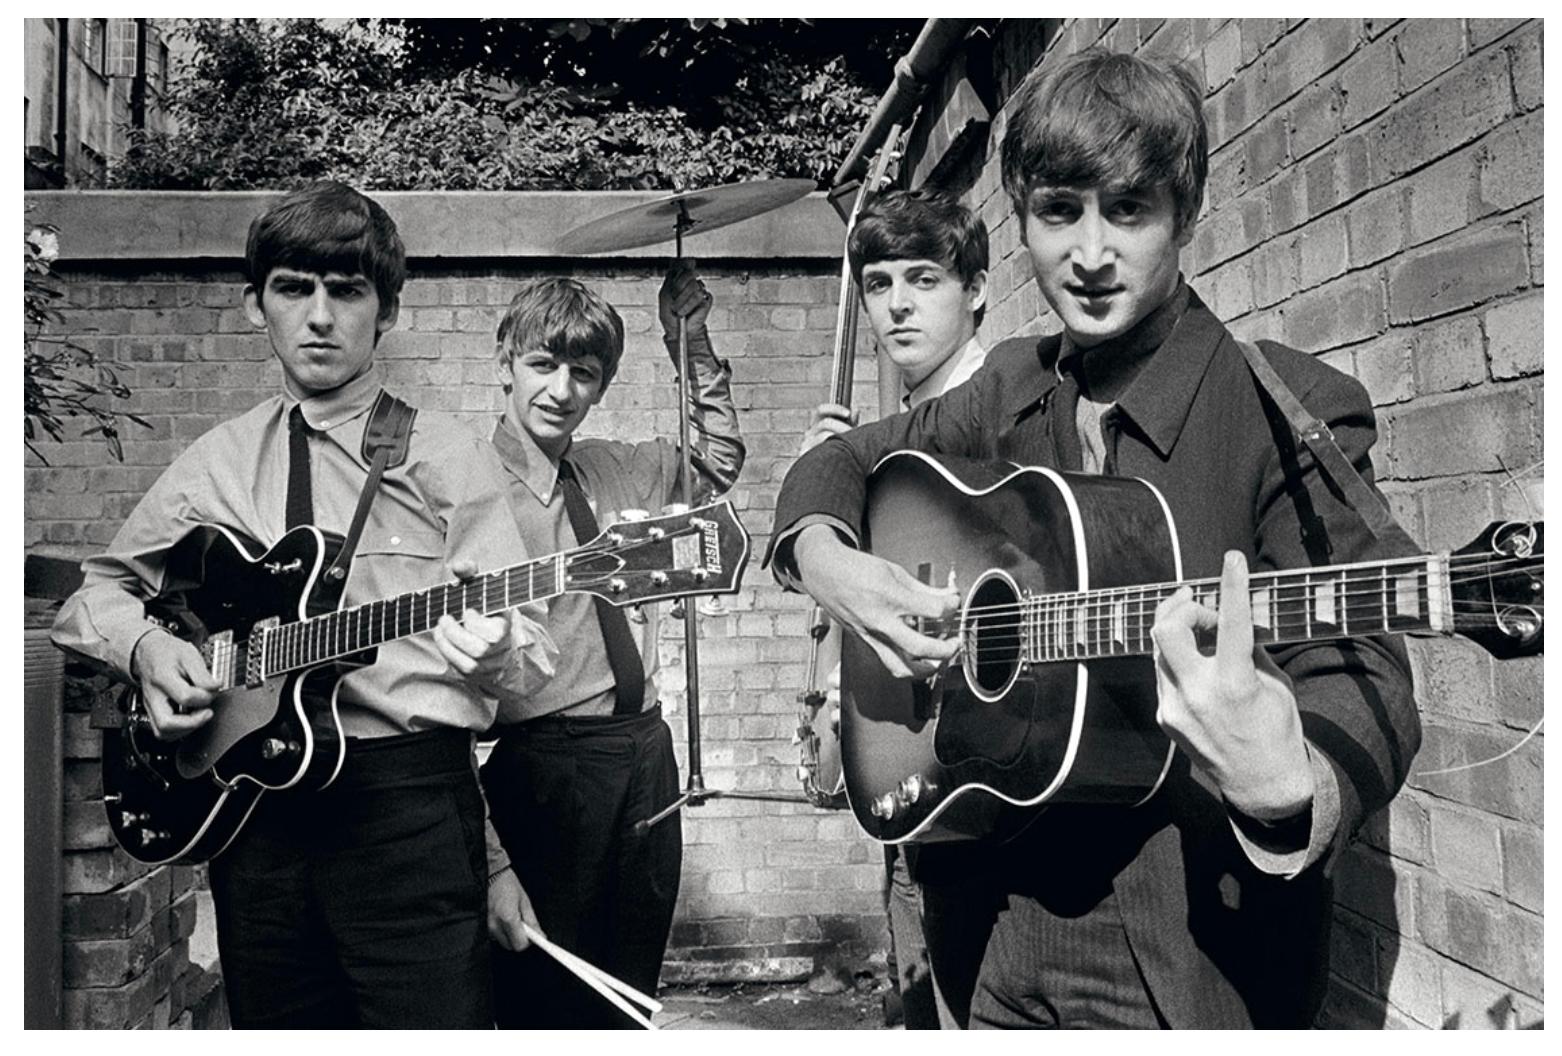 Terry O'Neill - Backyard Beatles - hand signed limited edition Oversize